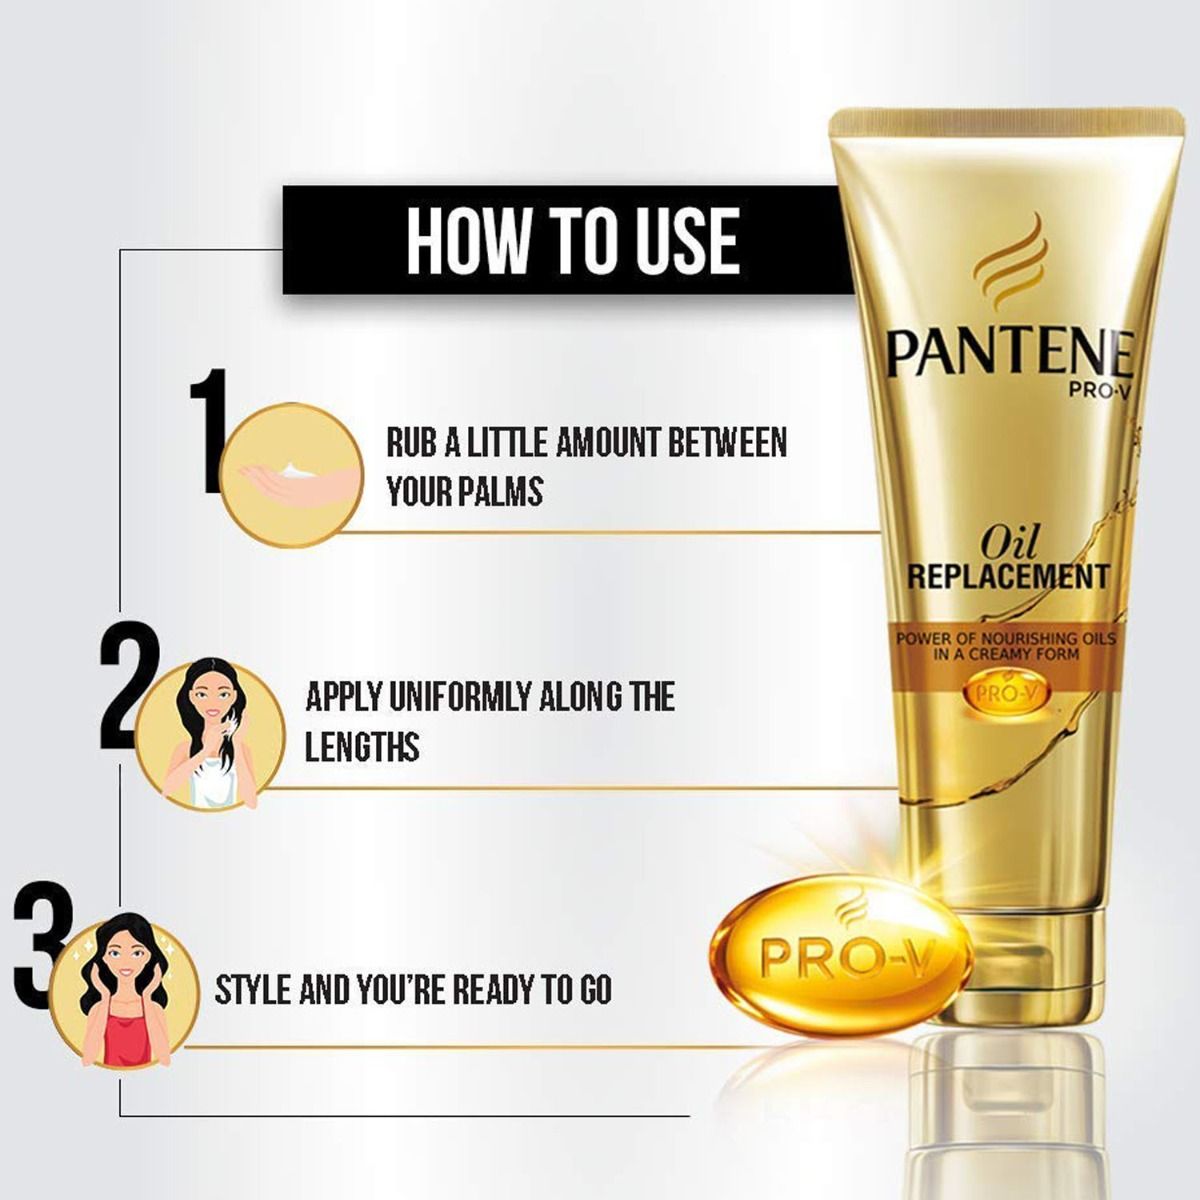 Pantene Pro-V Oil Replacement, 80 ml, Pack of 1 